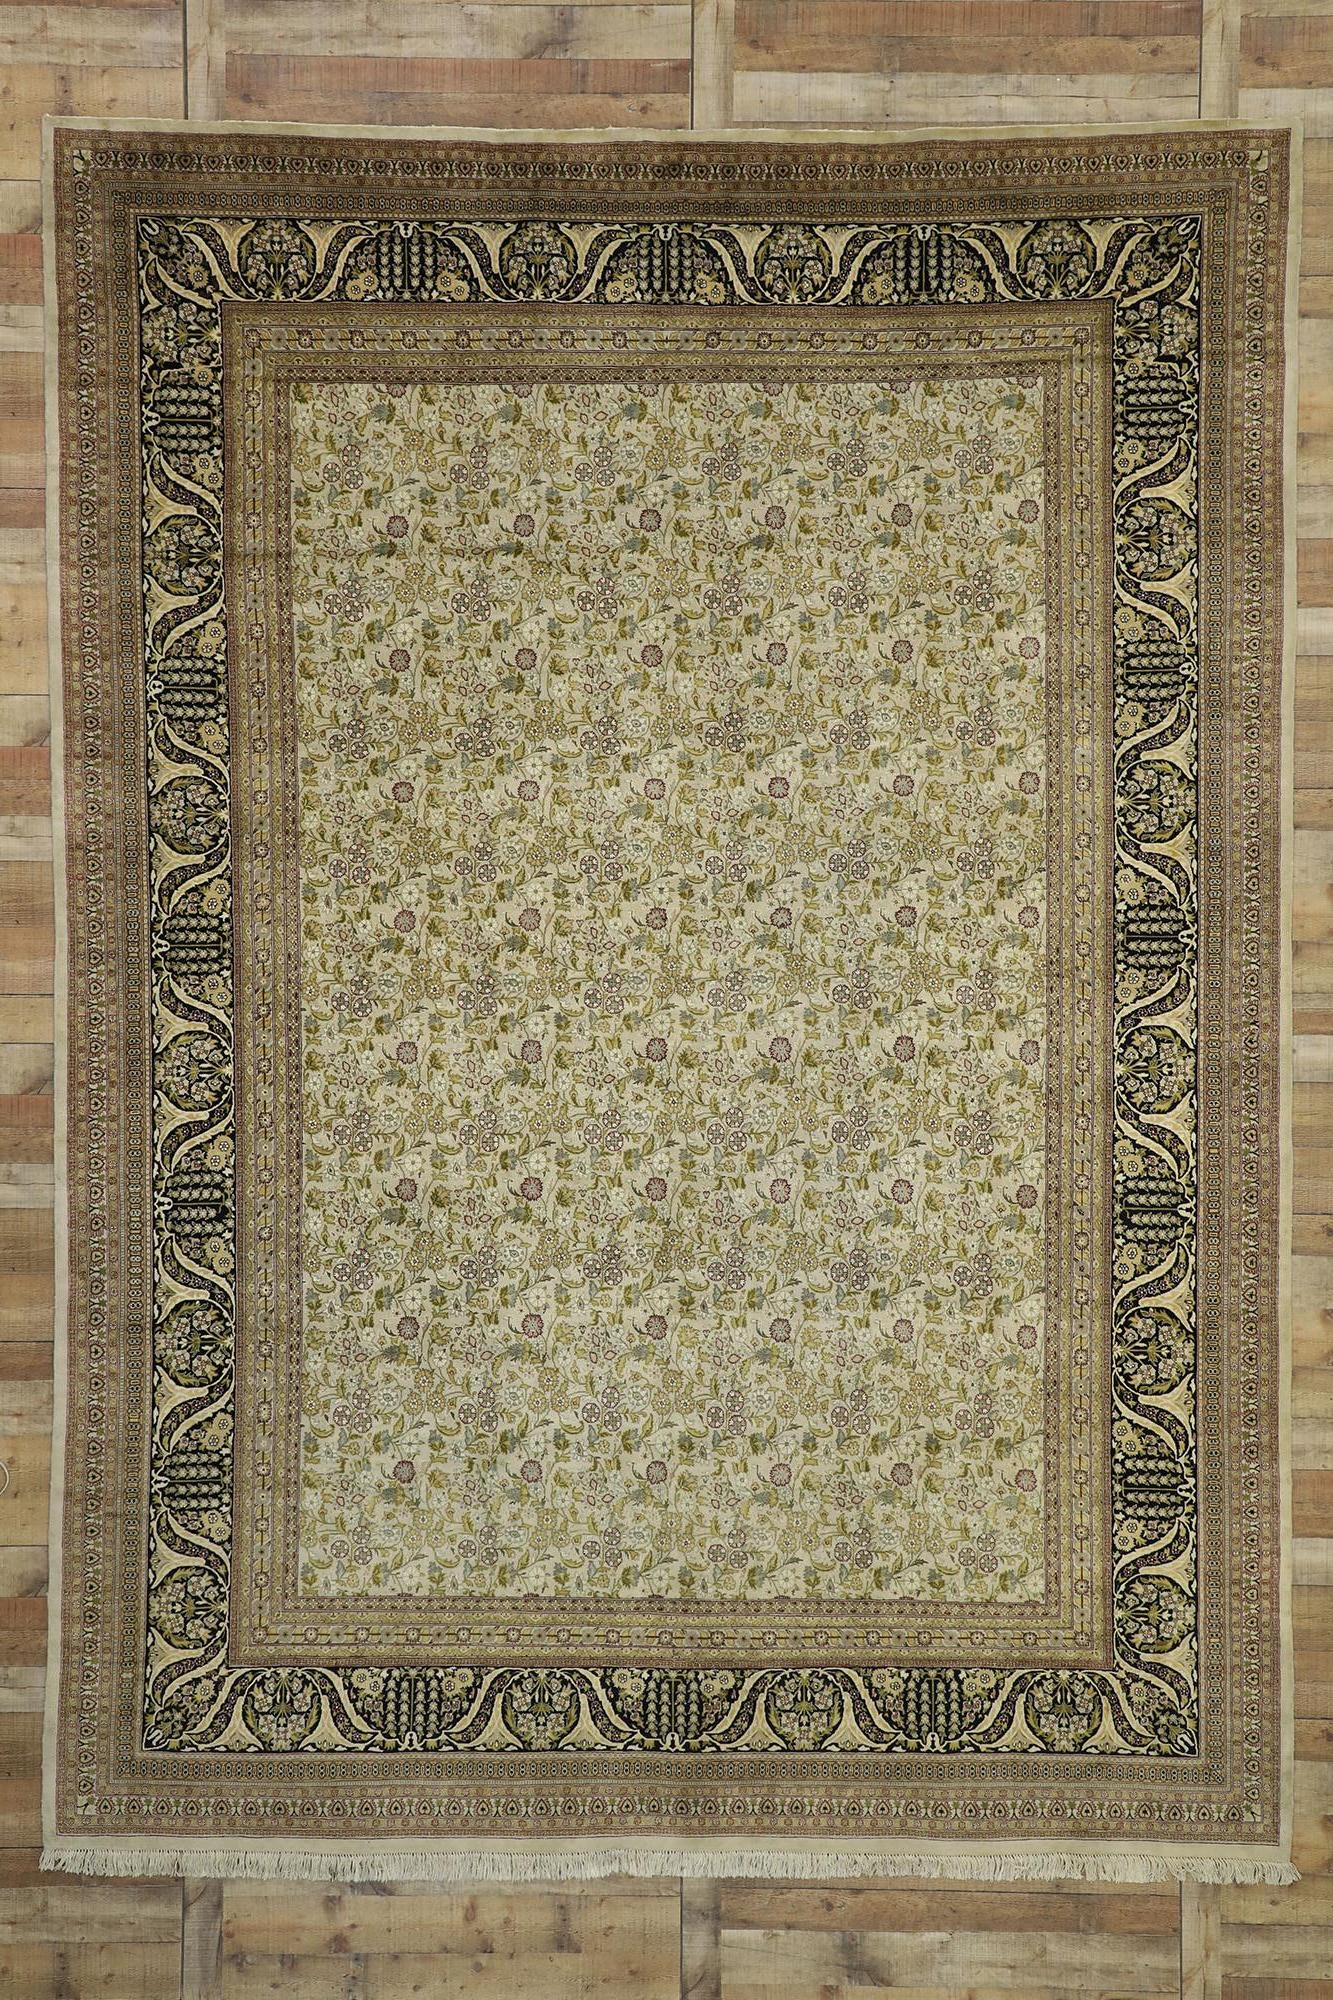 Wool Vintage Pakistani Traditional Area Rug with Arts & Crafts William Morris Style